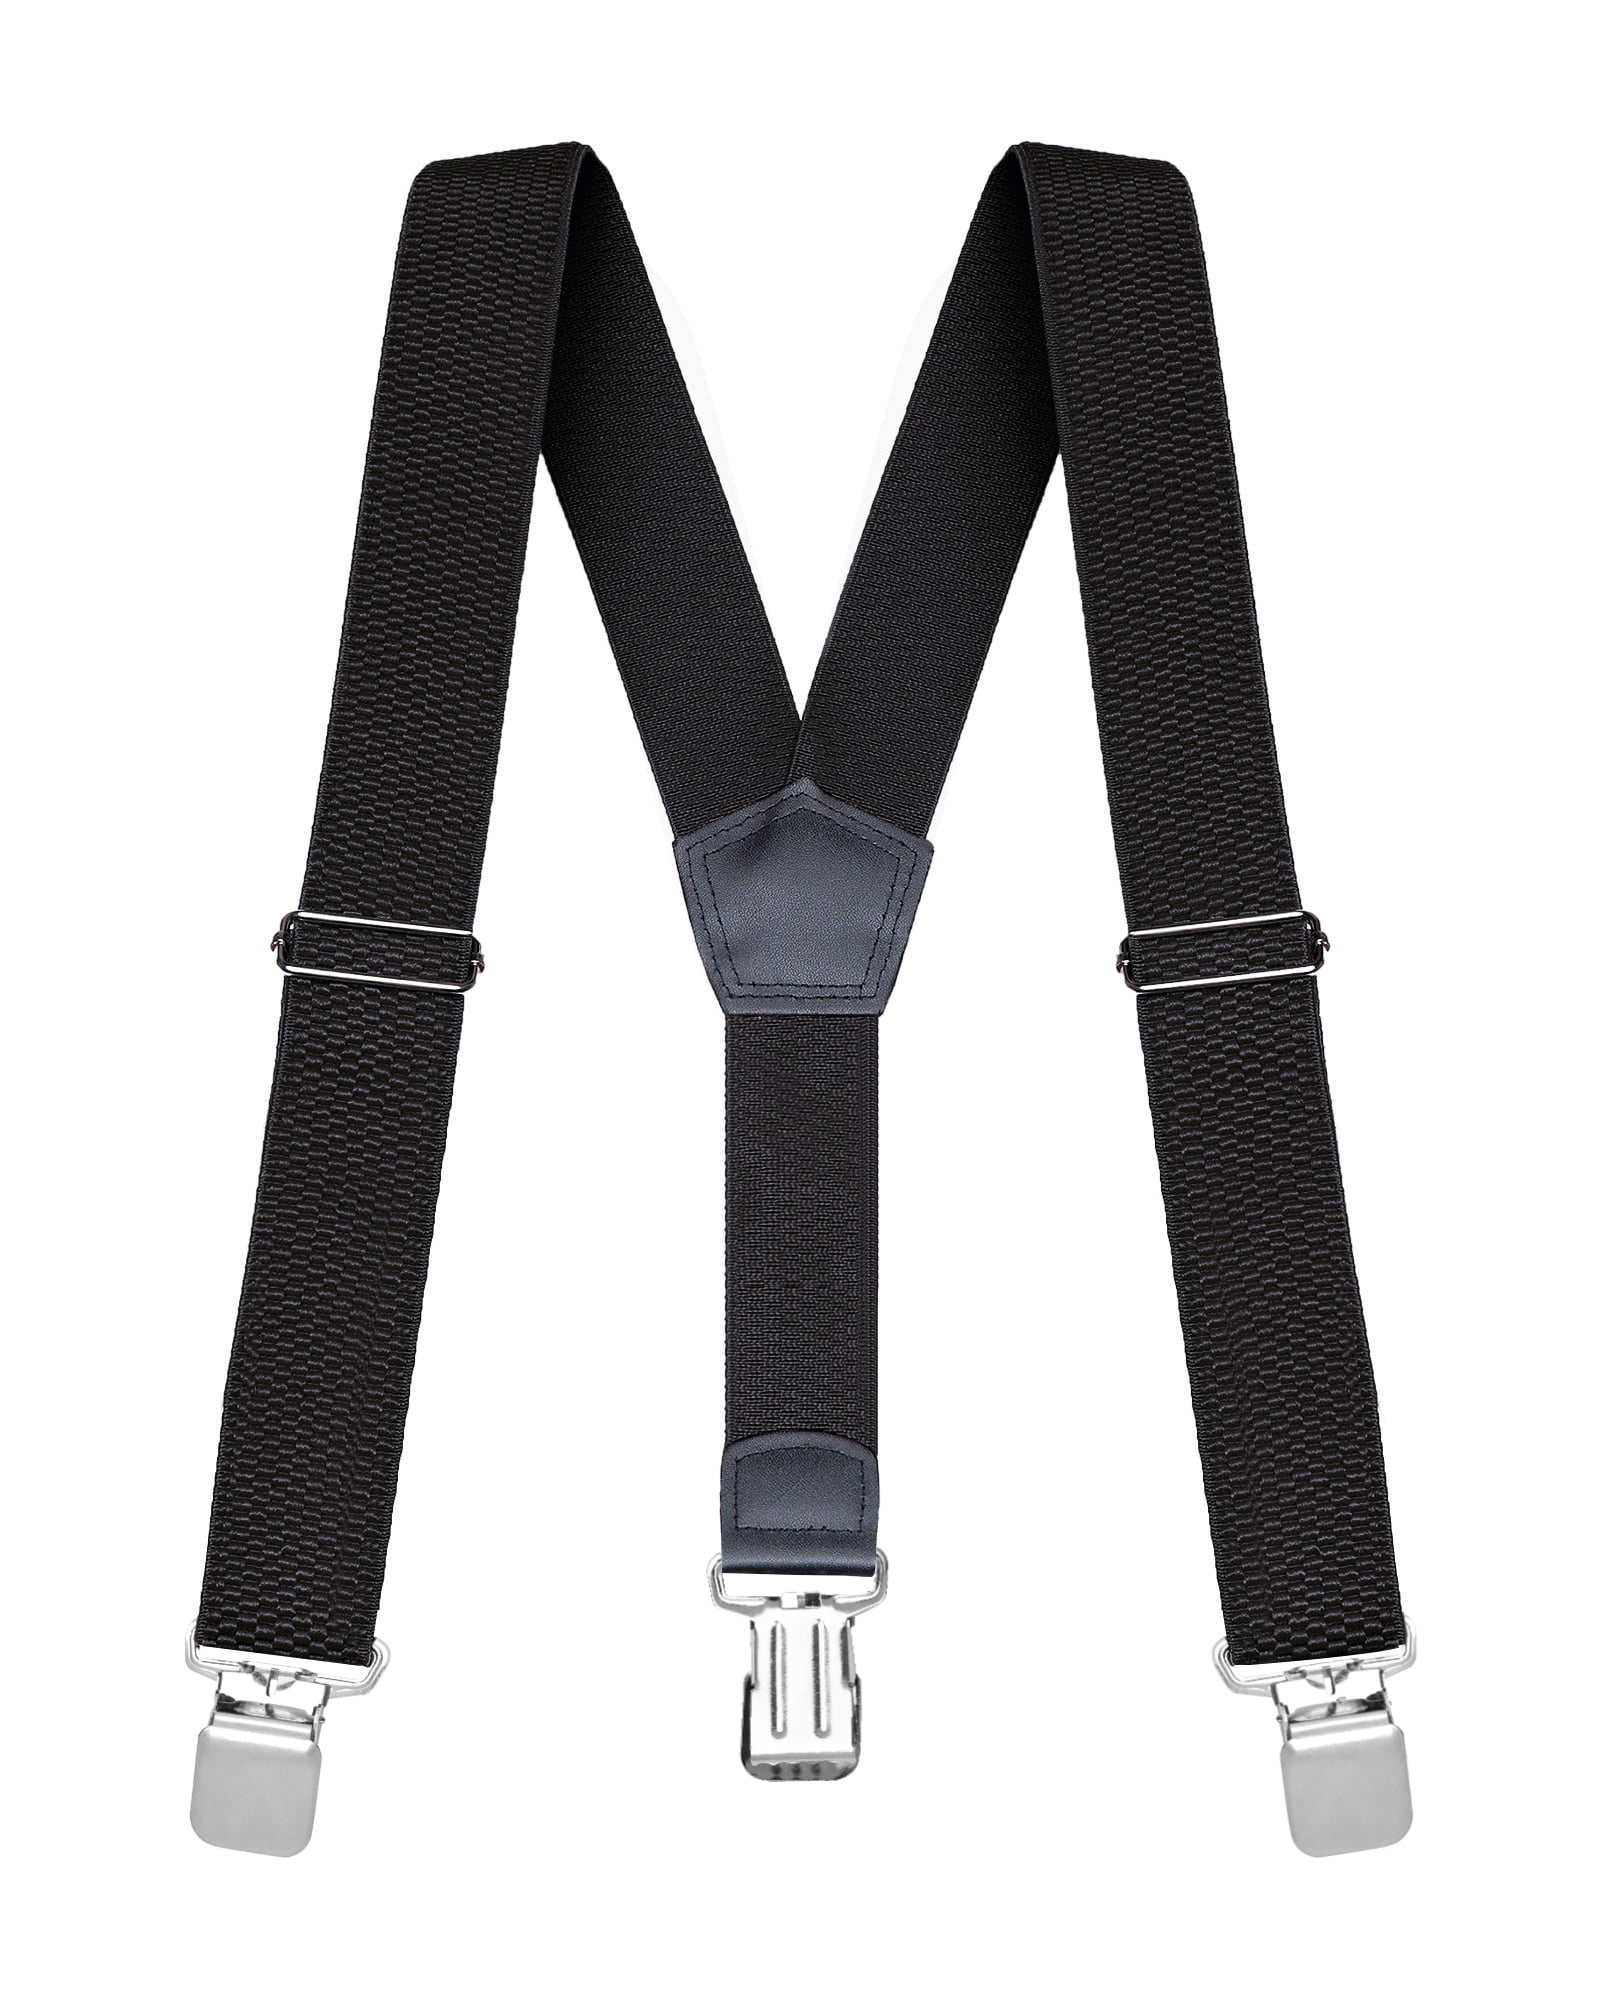 Buyless Fashion - Buyless Fashion Heavy Duty Textured Suspenders for ...